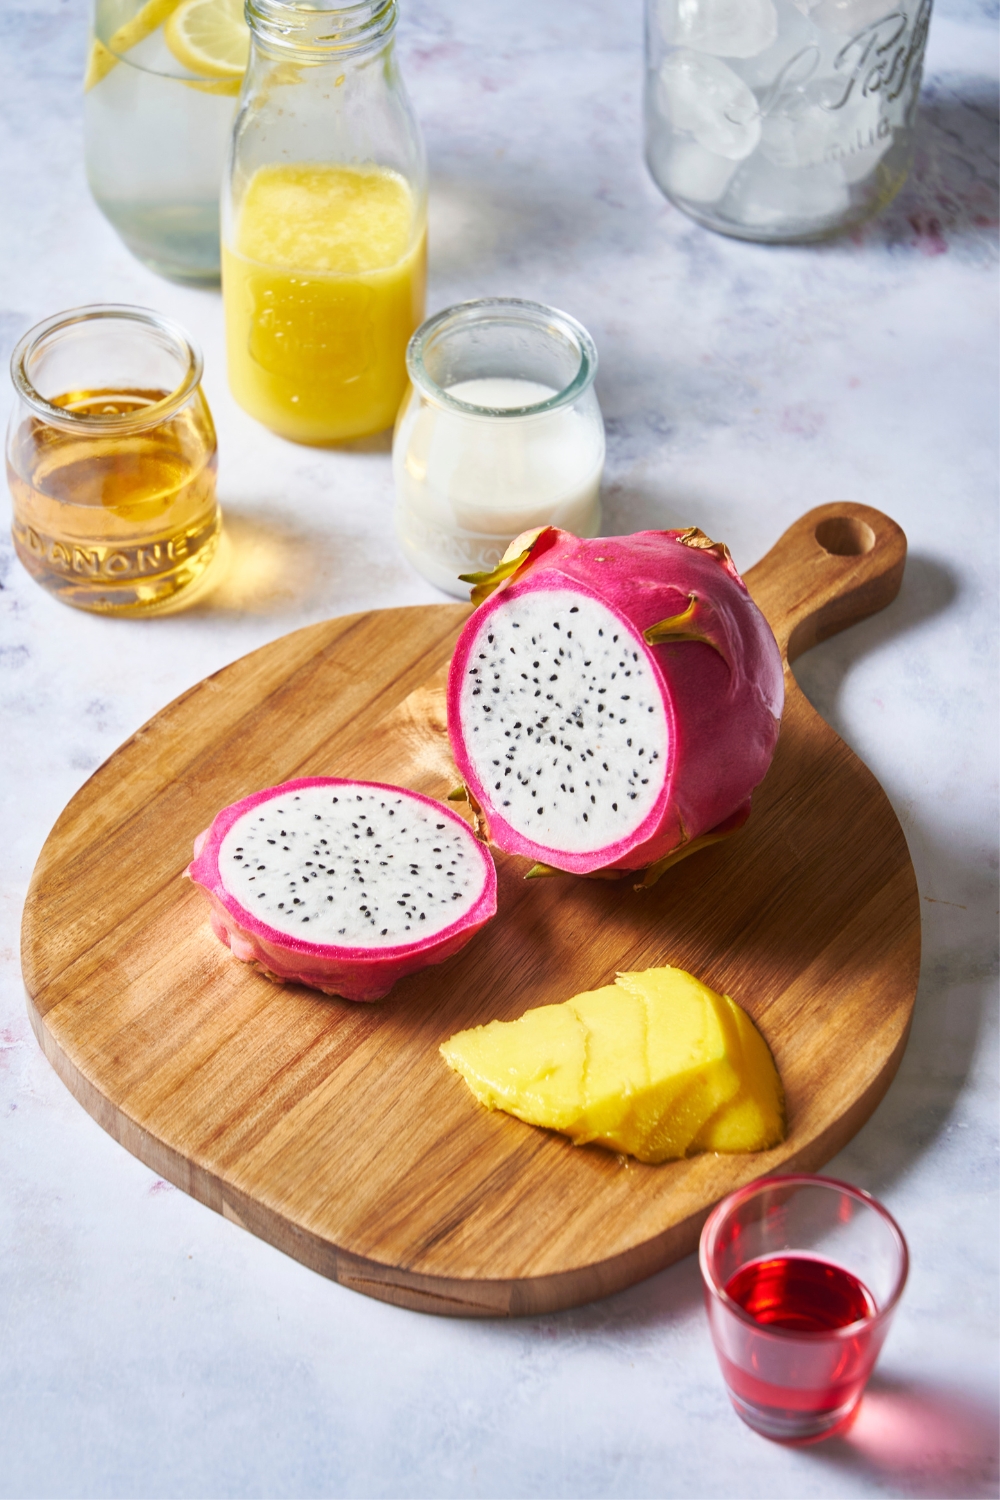 A dragonfruit on a wooden cutting board. Small glasses with juice and a small shot glass with grenadine sit around to it.